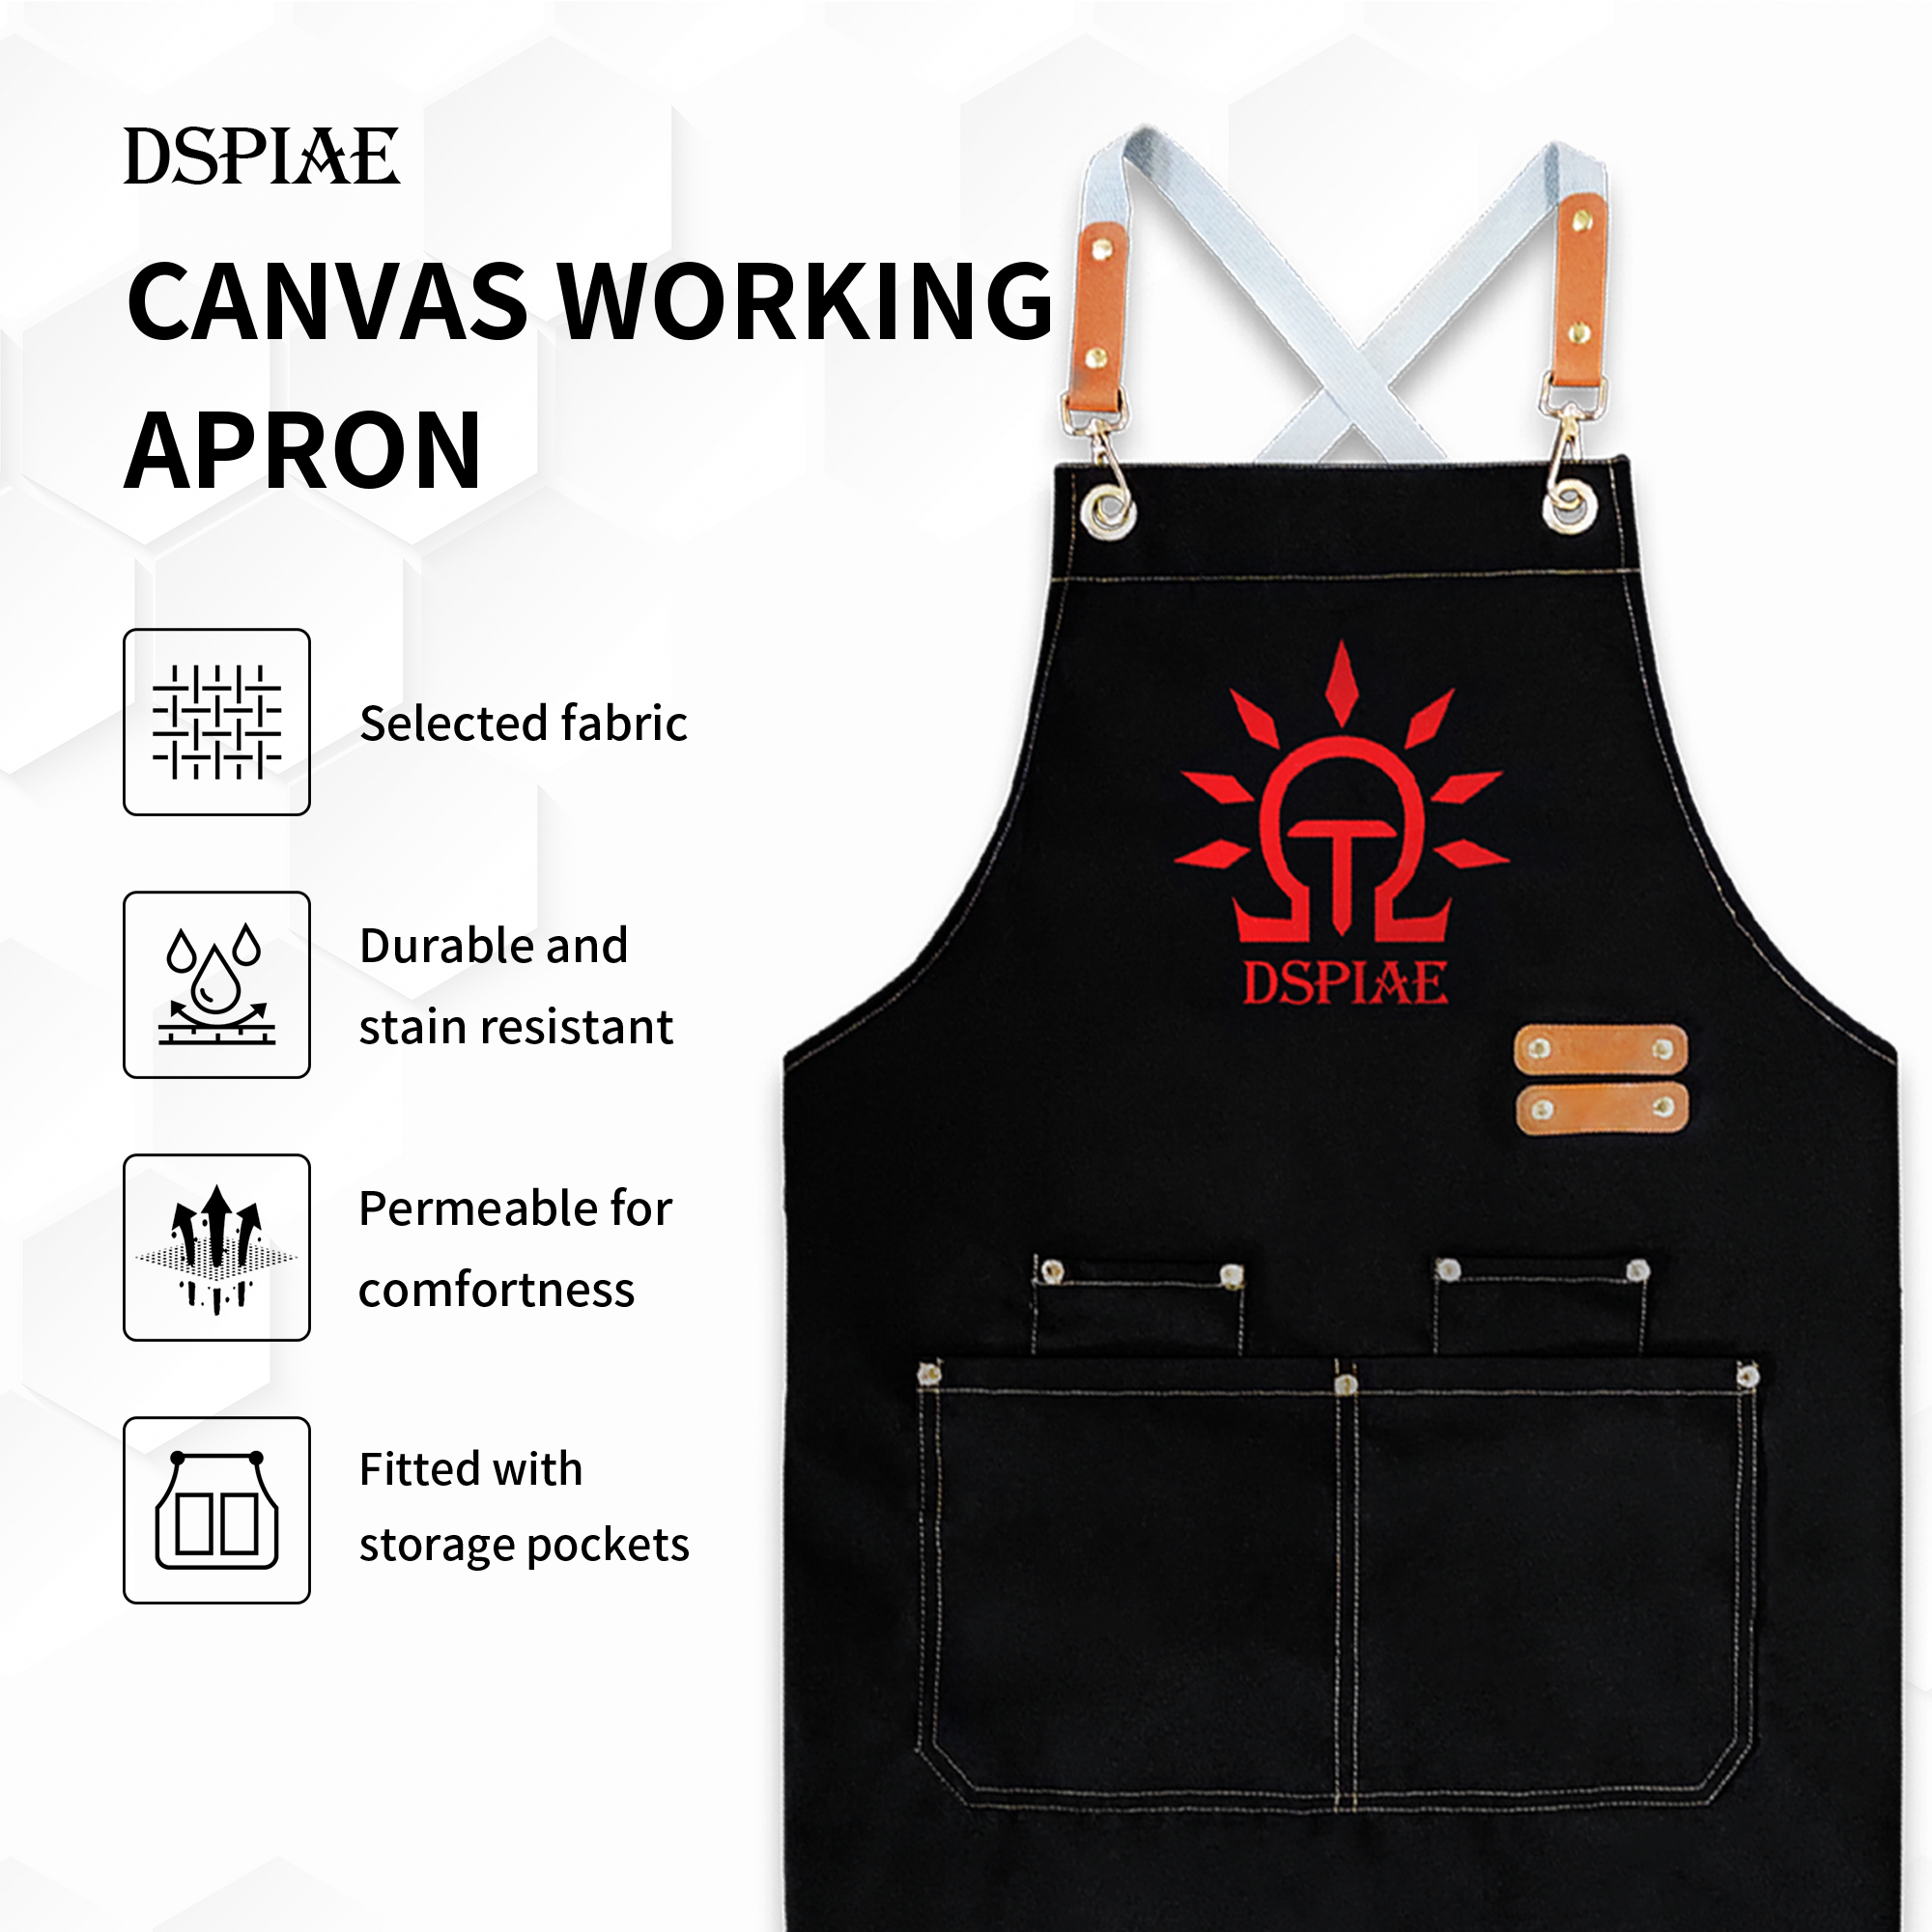 DSPIAE - CAN-01 Canvas Working Apron